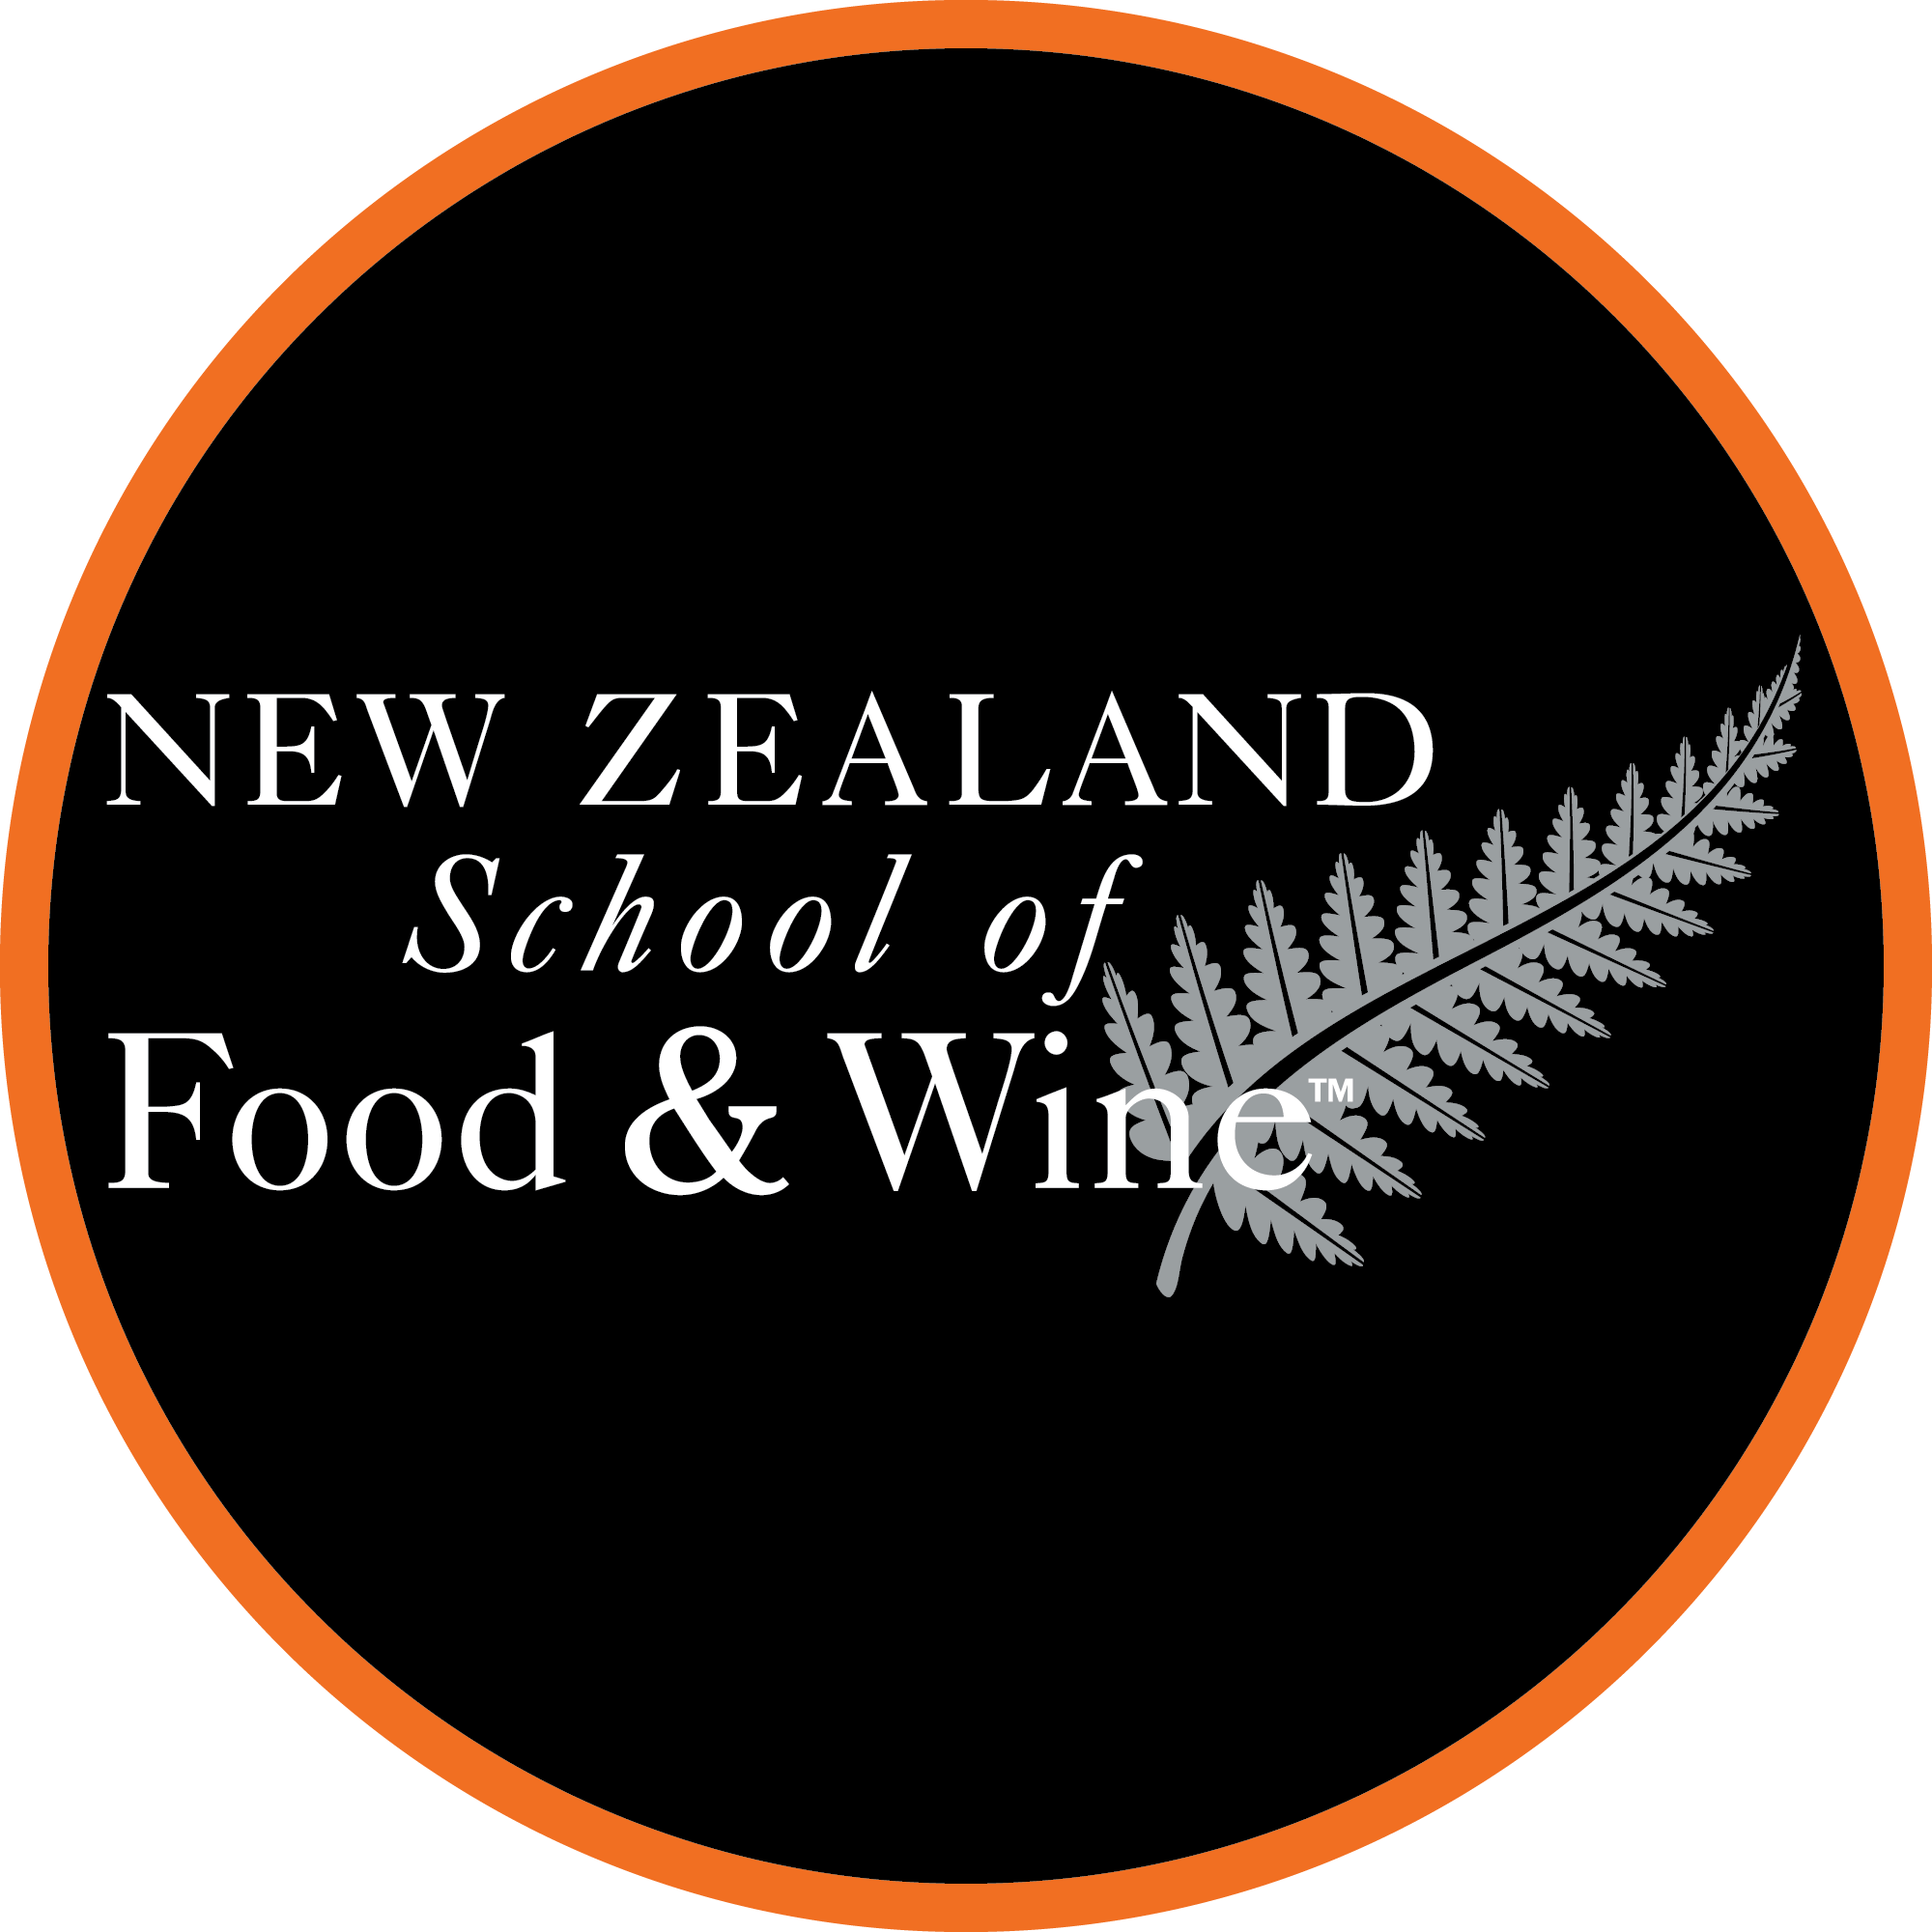 The New Zealand School of Food and Wine